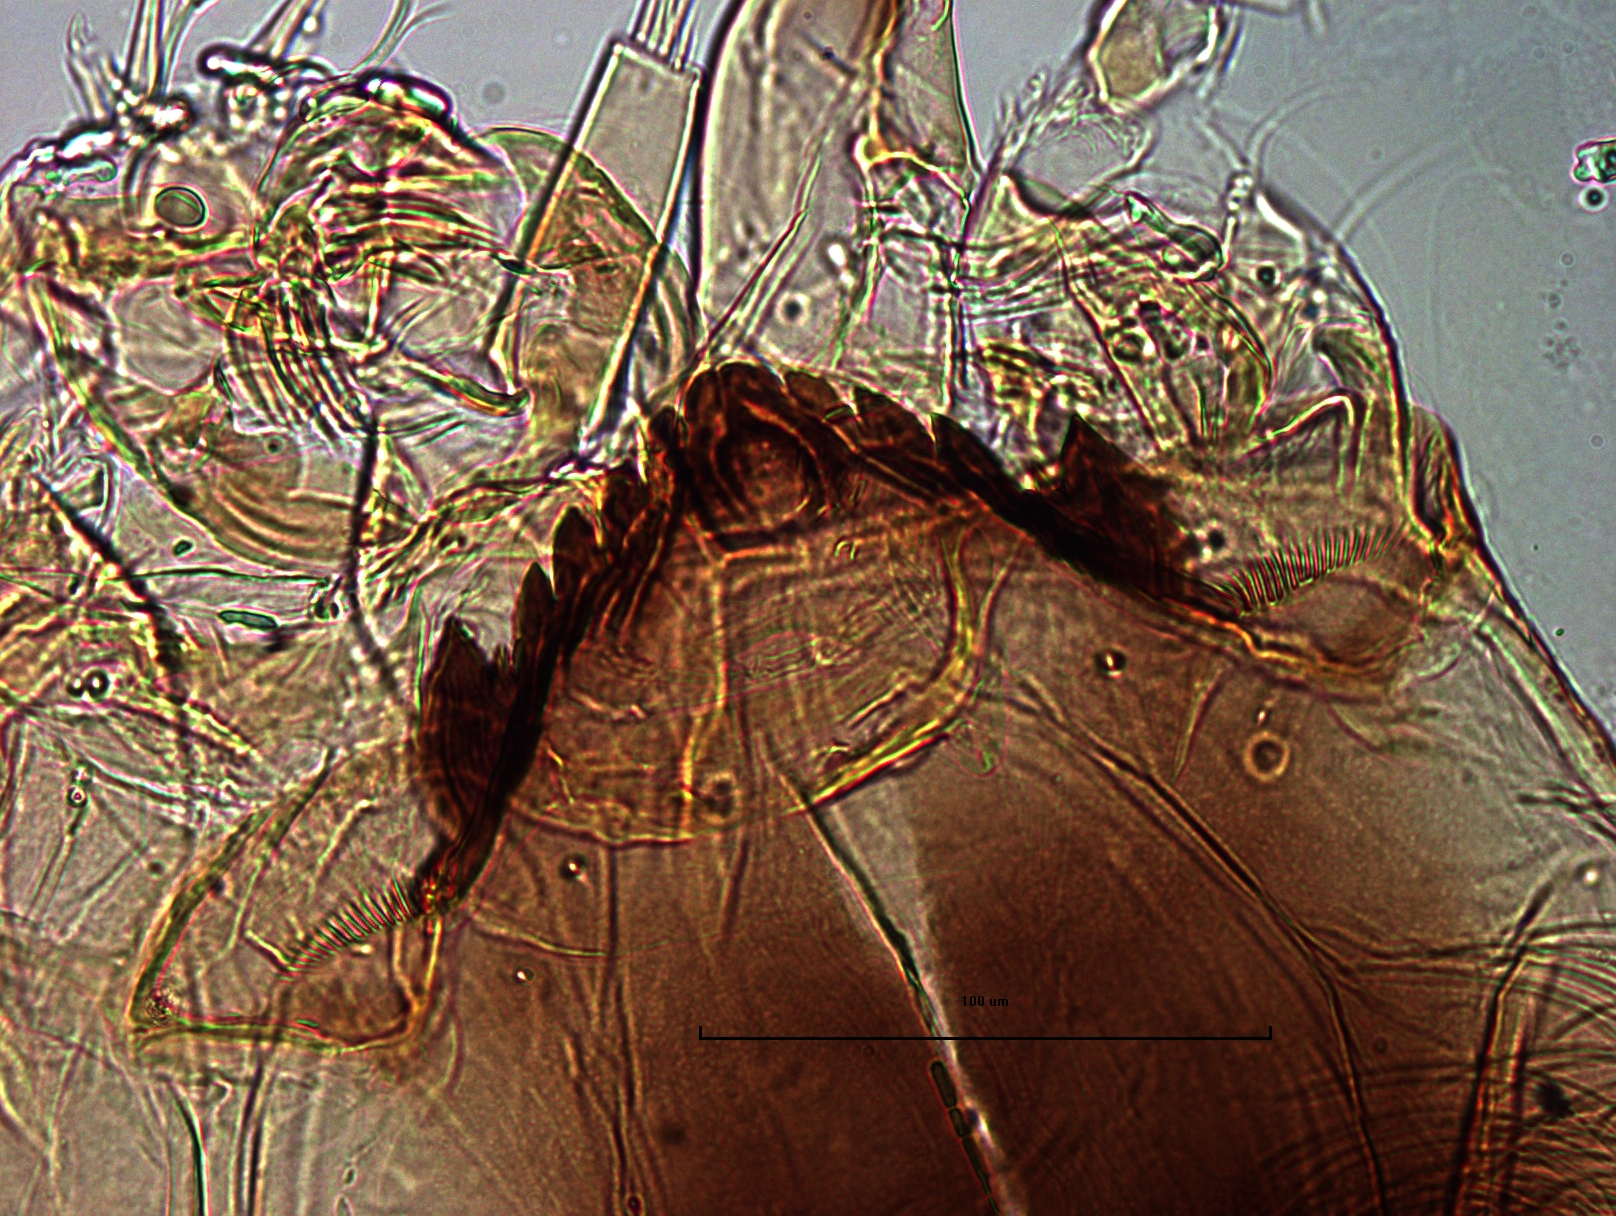 photomicrograph of a chironomid midge larva head capsule showing outer mentum teeth, ventral head portion, and ventromental plates.